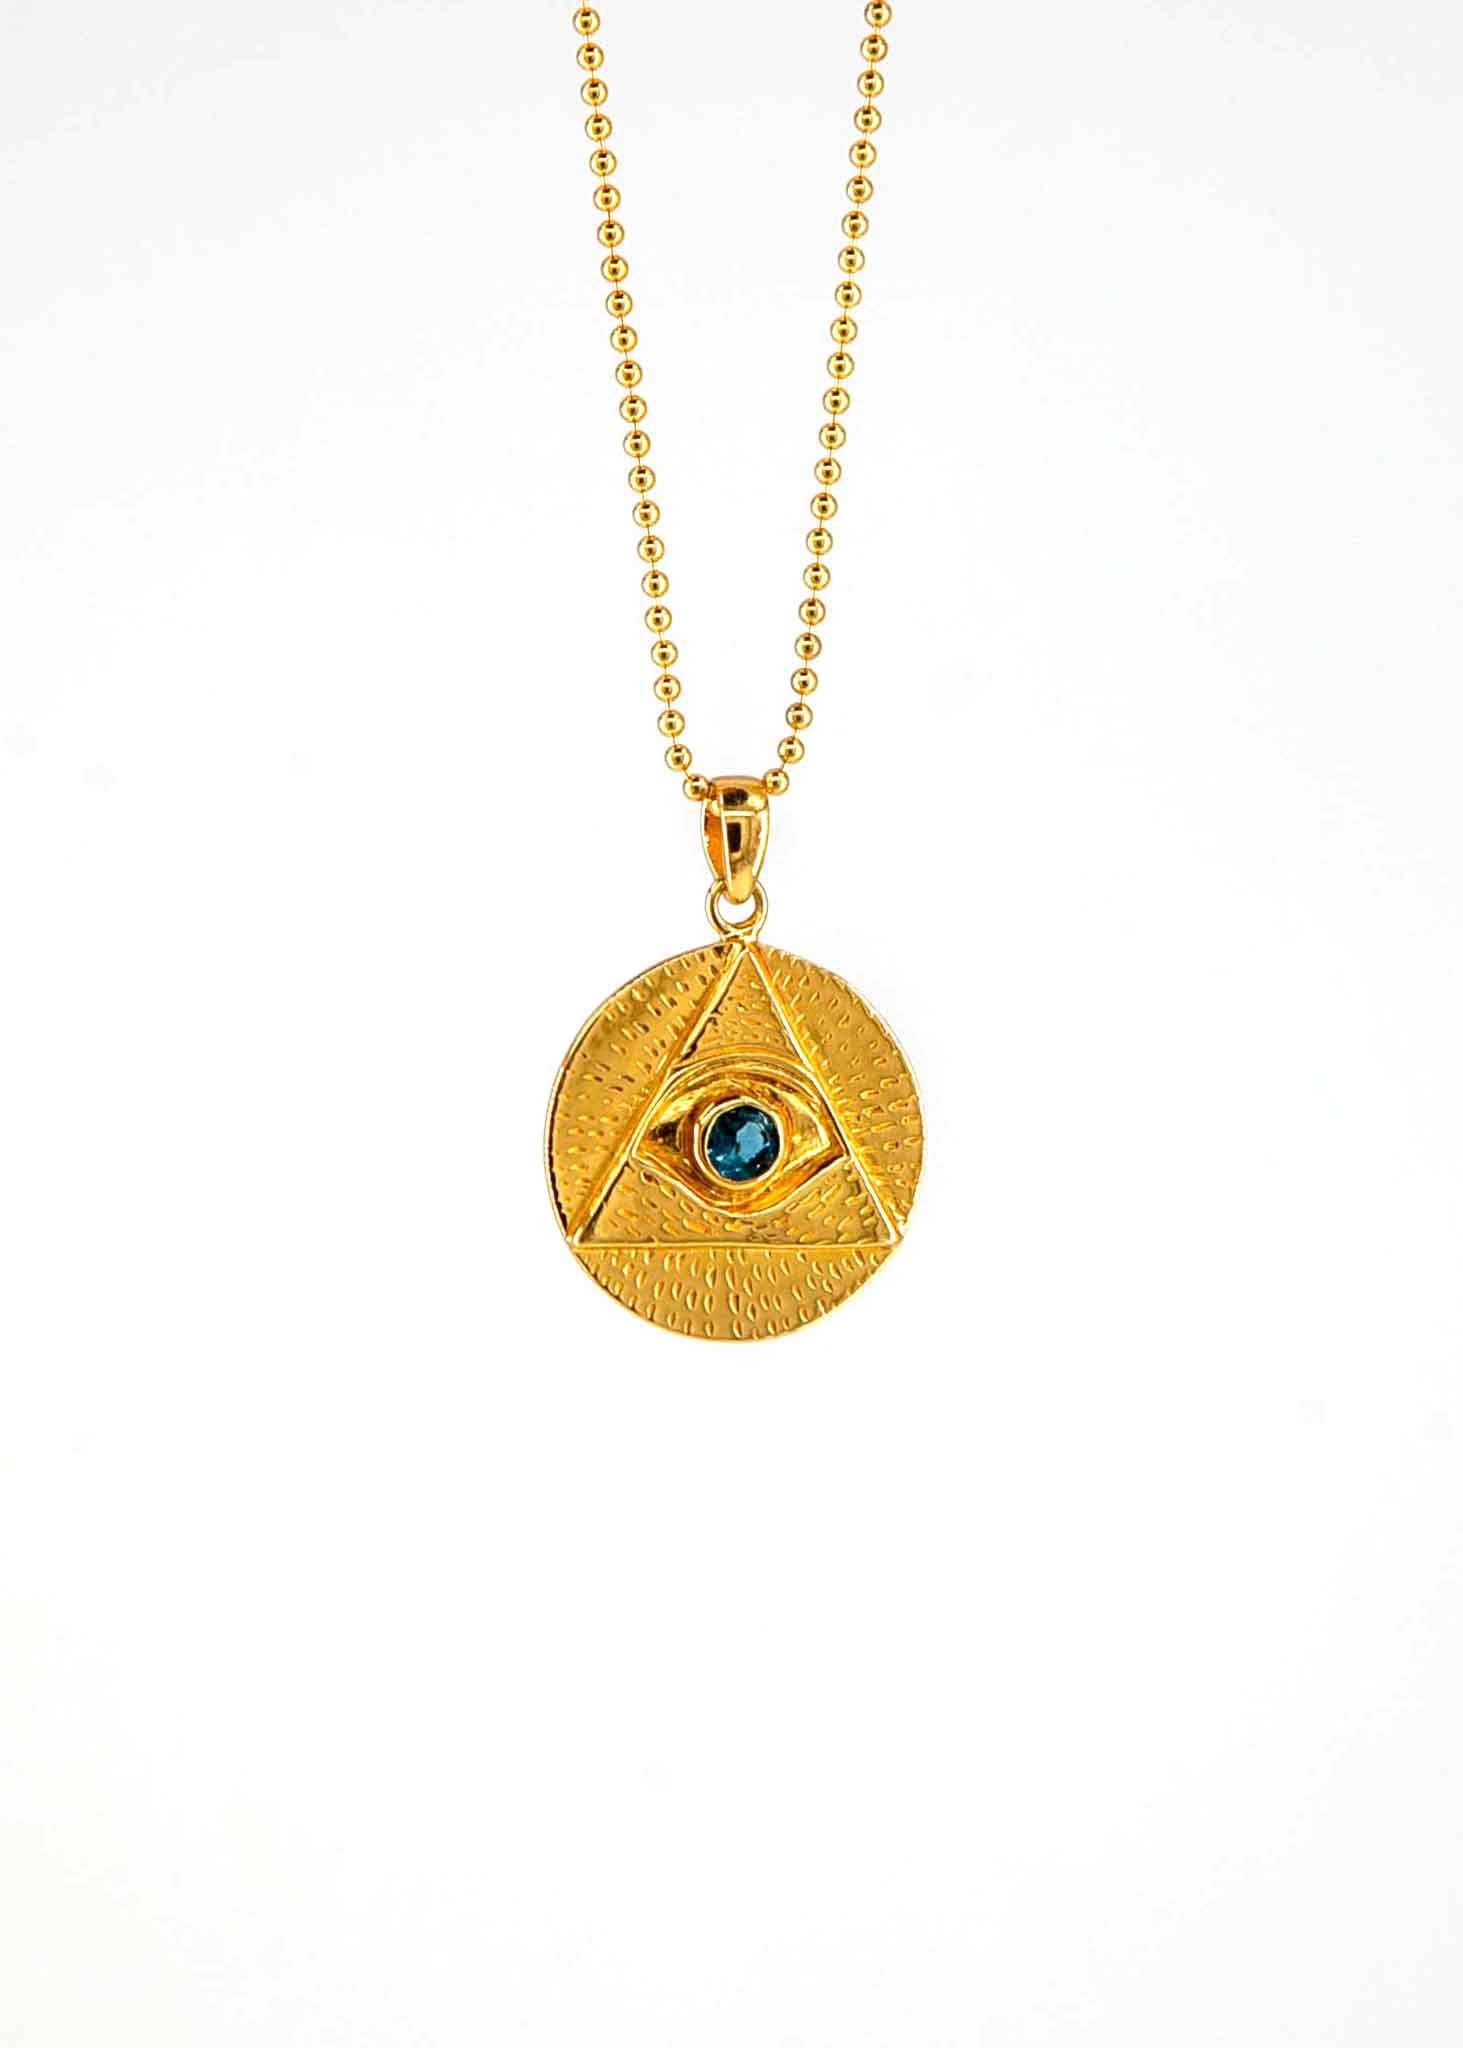 The All Seeing Eye Protection Amulet